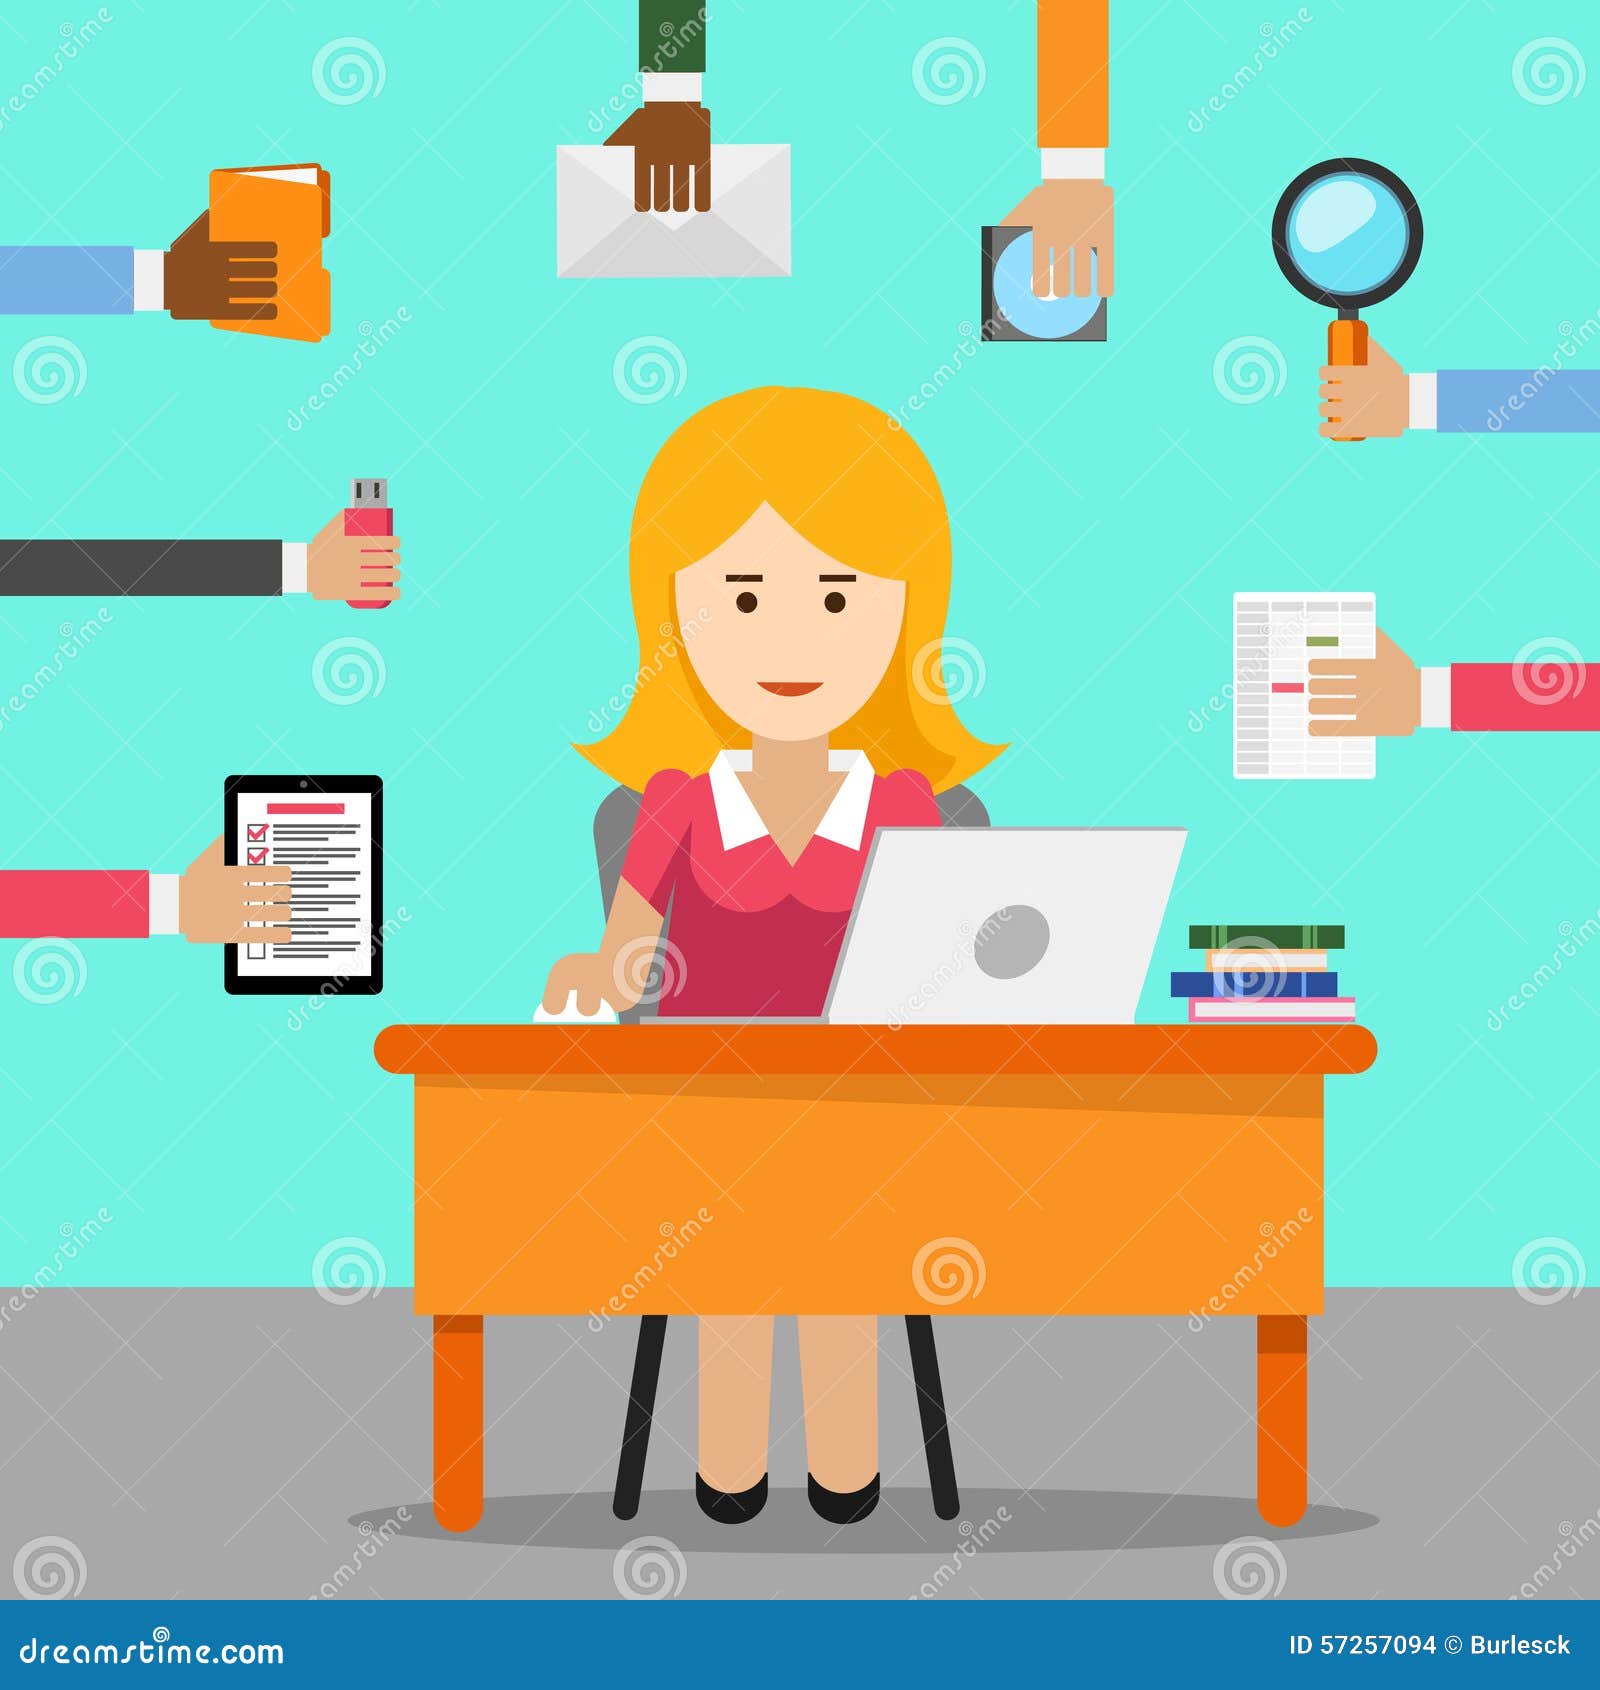 Secretary. Busy Woman For Office Work Stock Vector - Image: 57257094